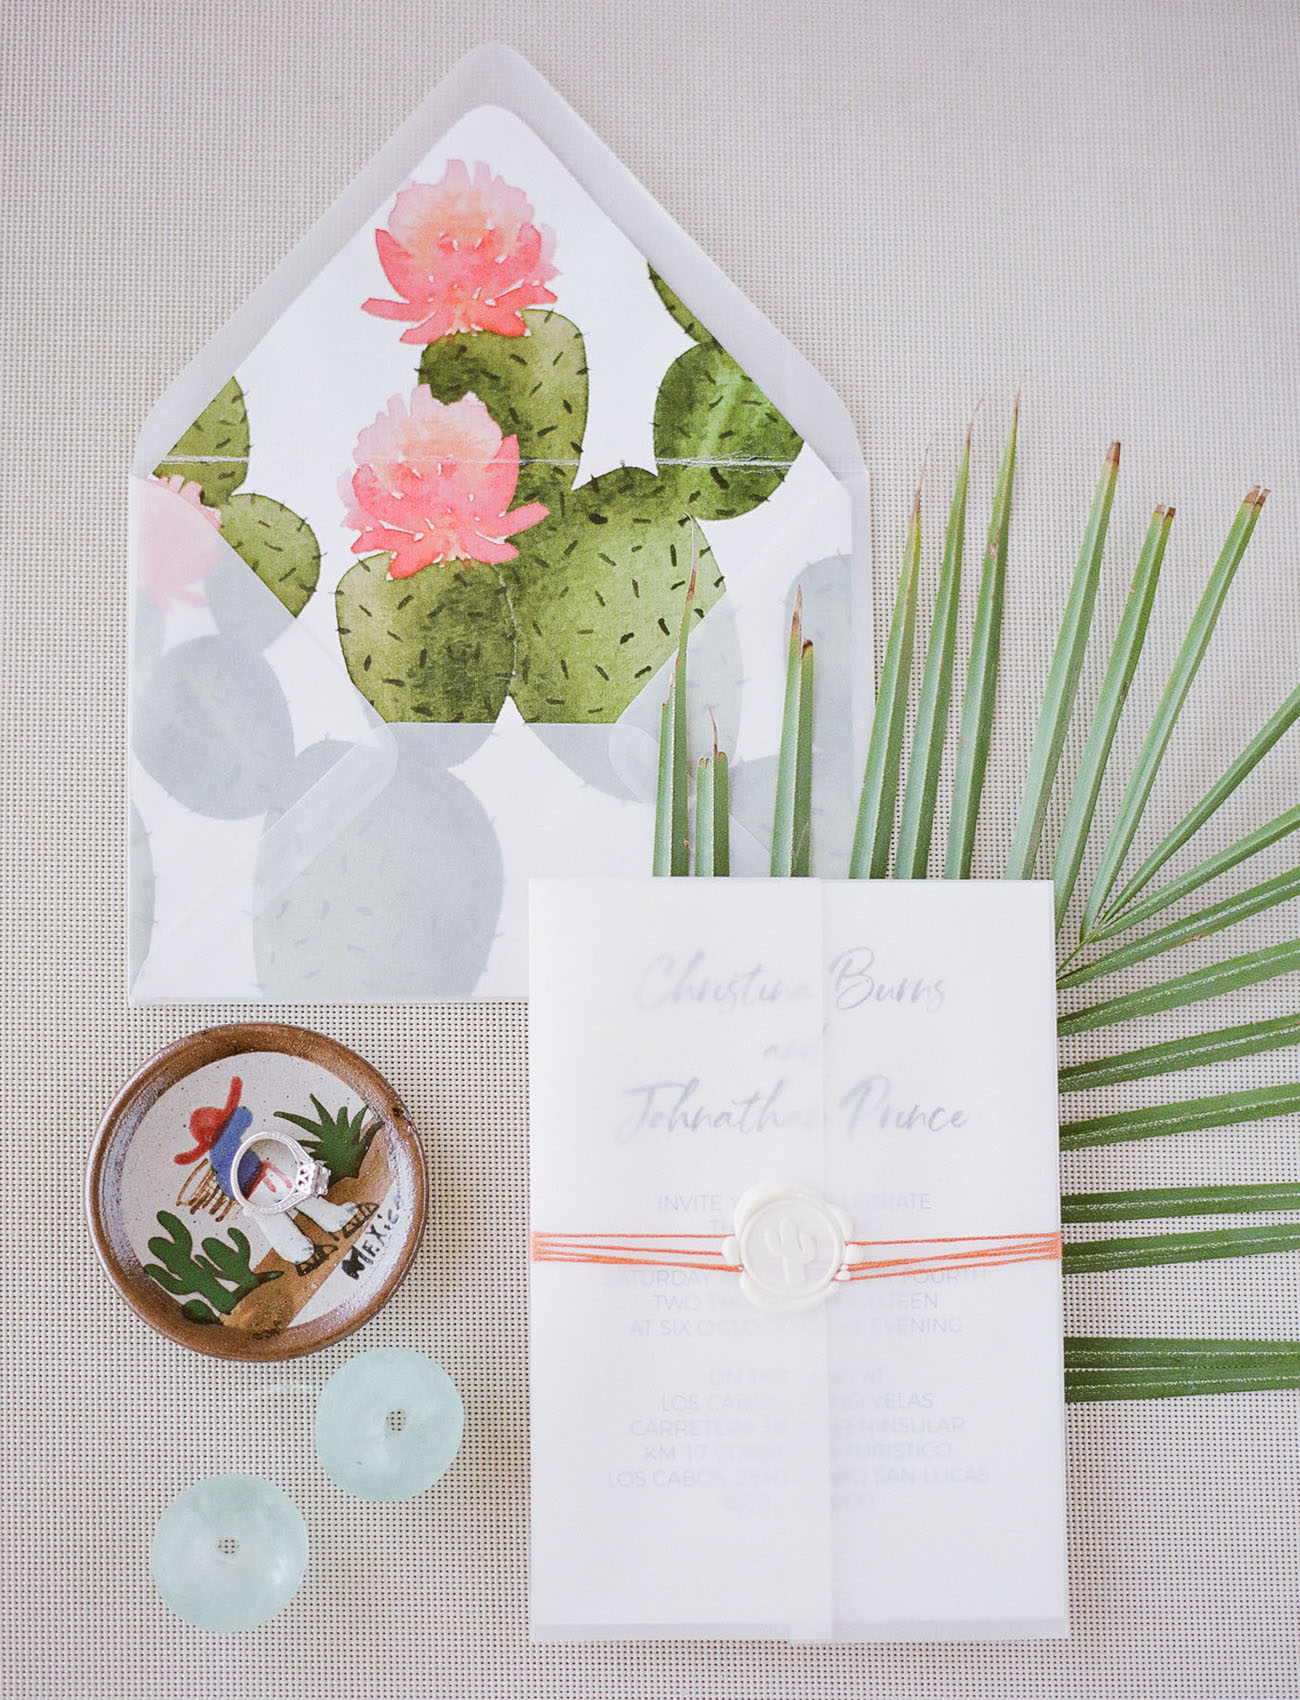 The wedding stationery suite was done with cacti and colorful yarn to embrace the destination